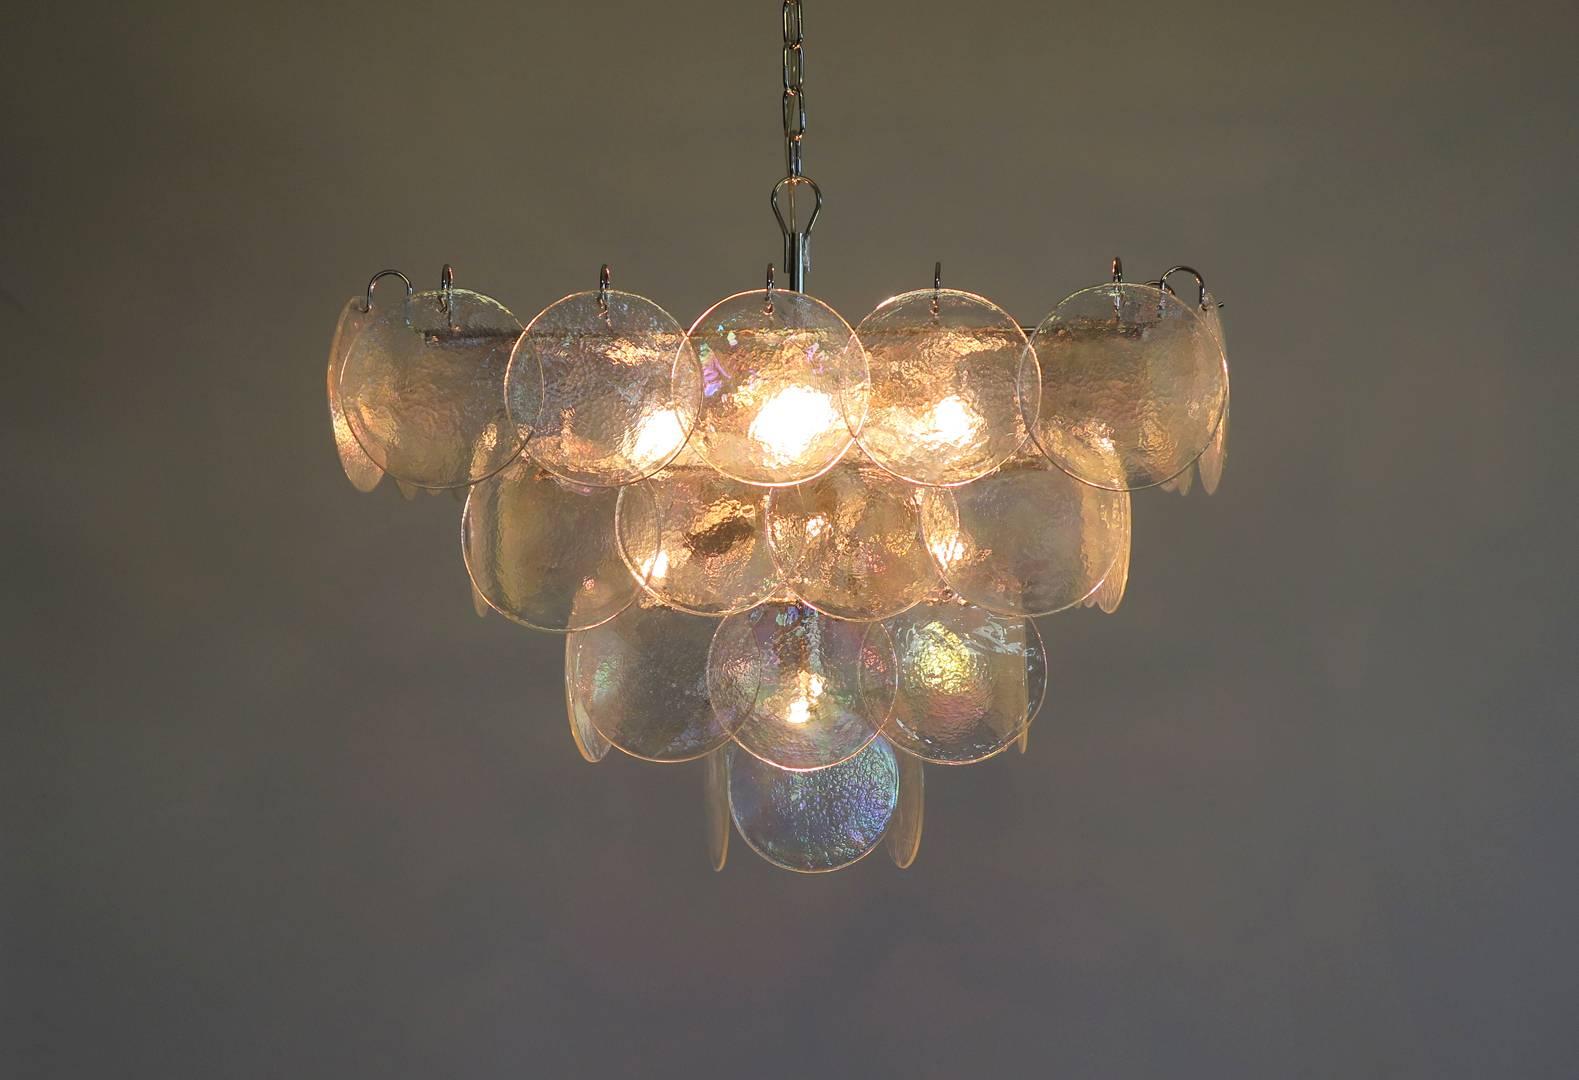 High Quality Murano Chandelier Space Age, Iridescent Glasses 2